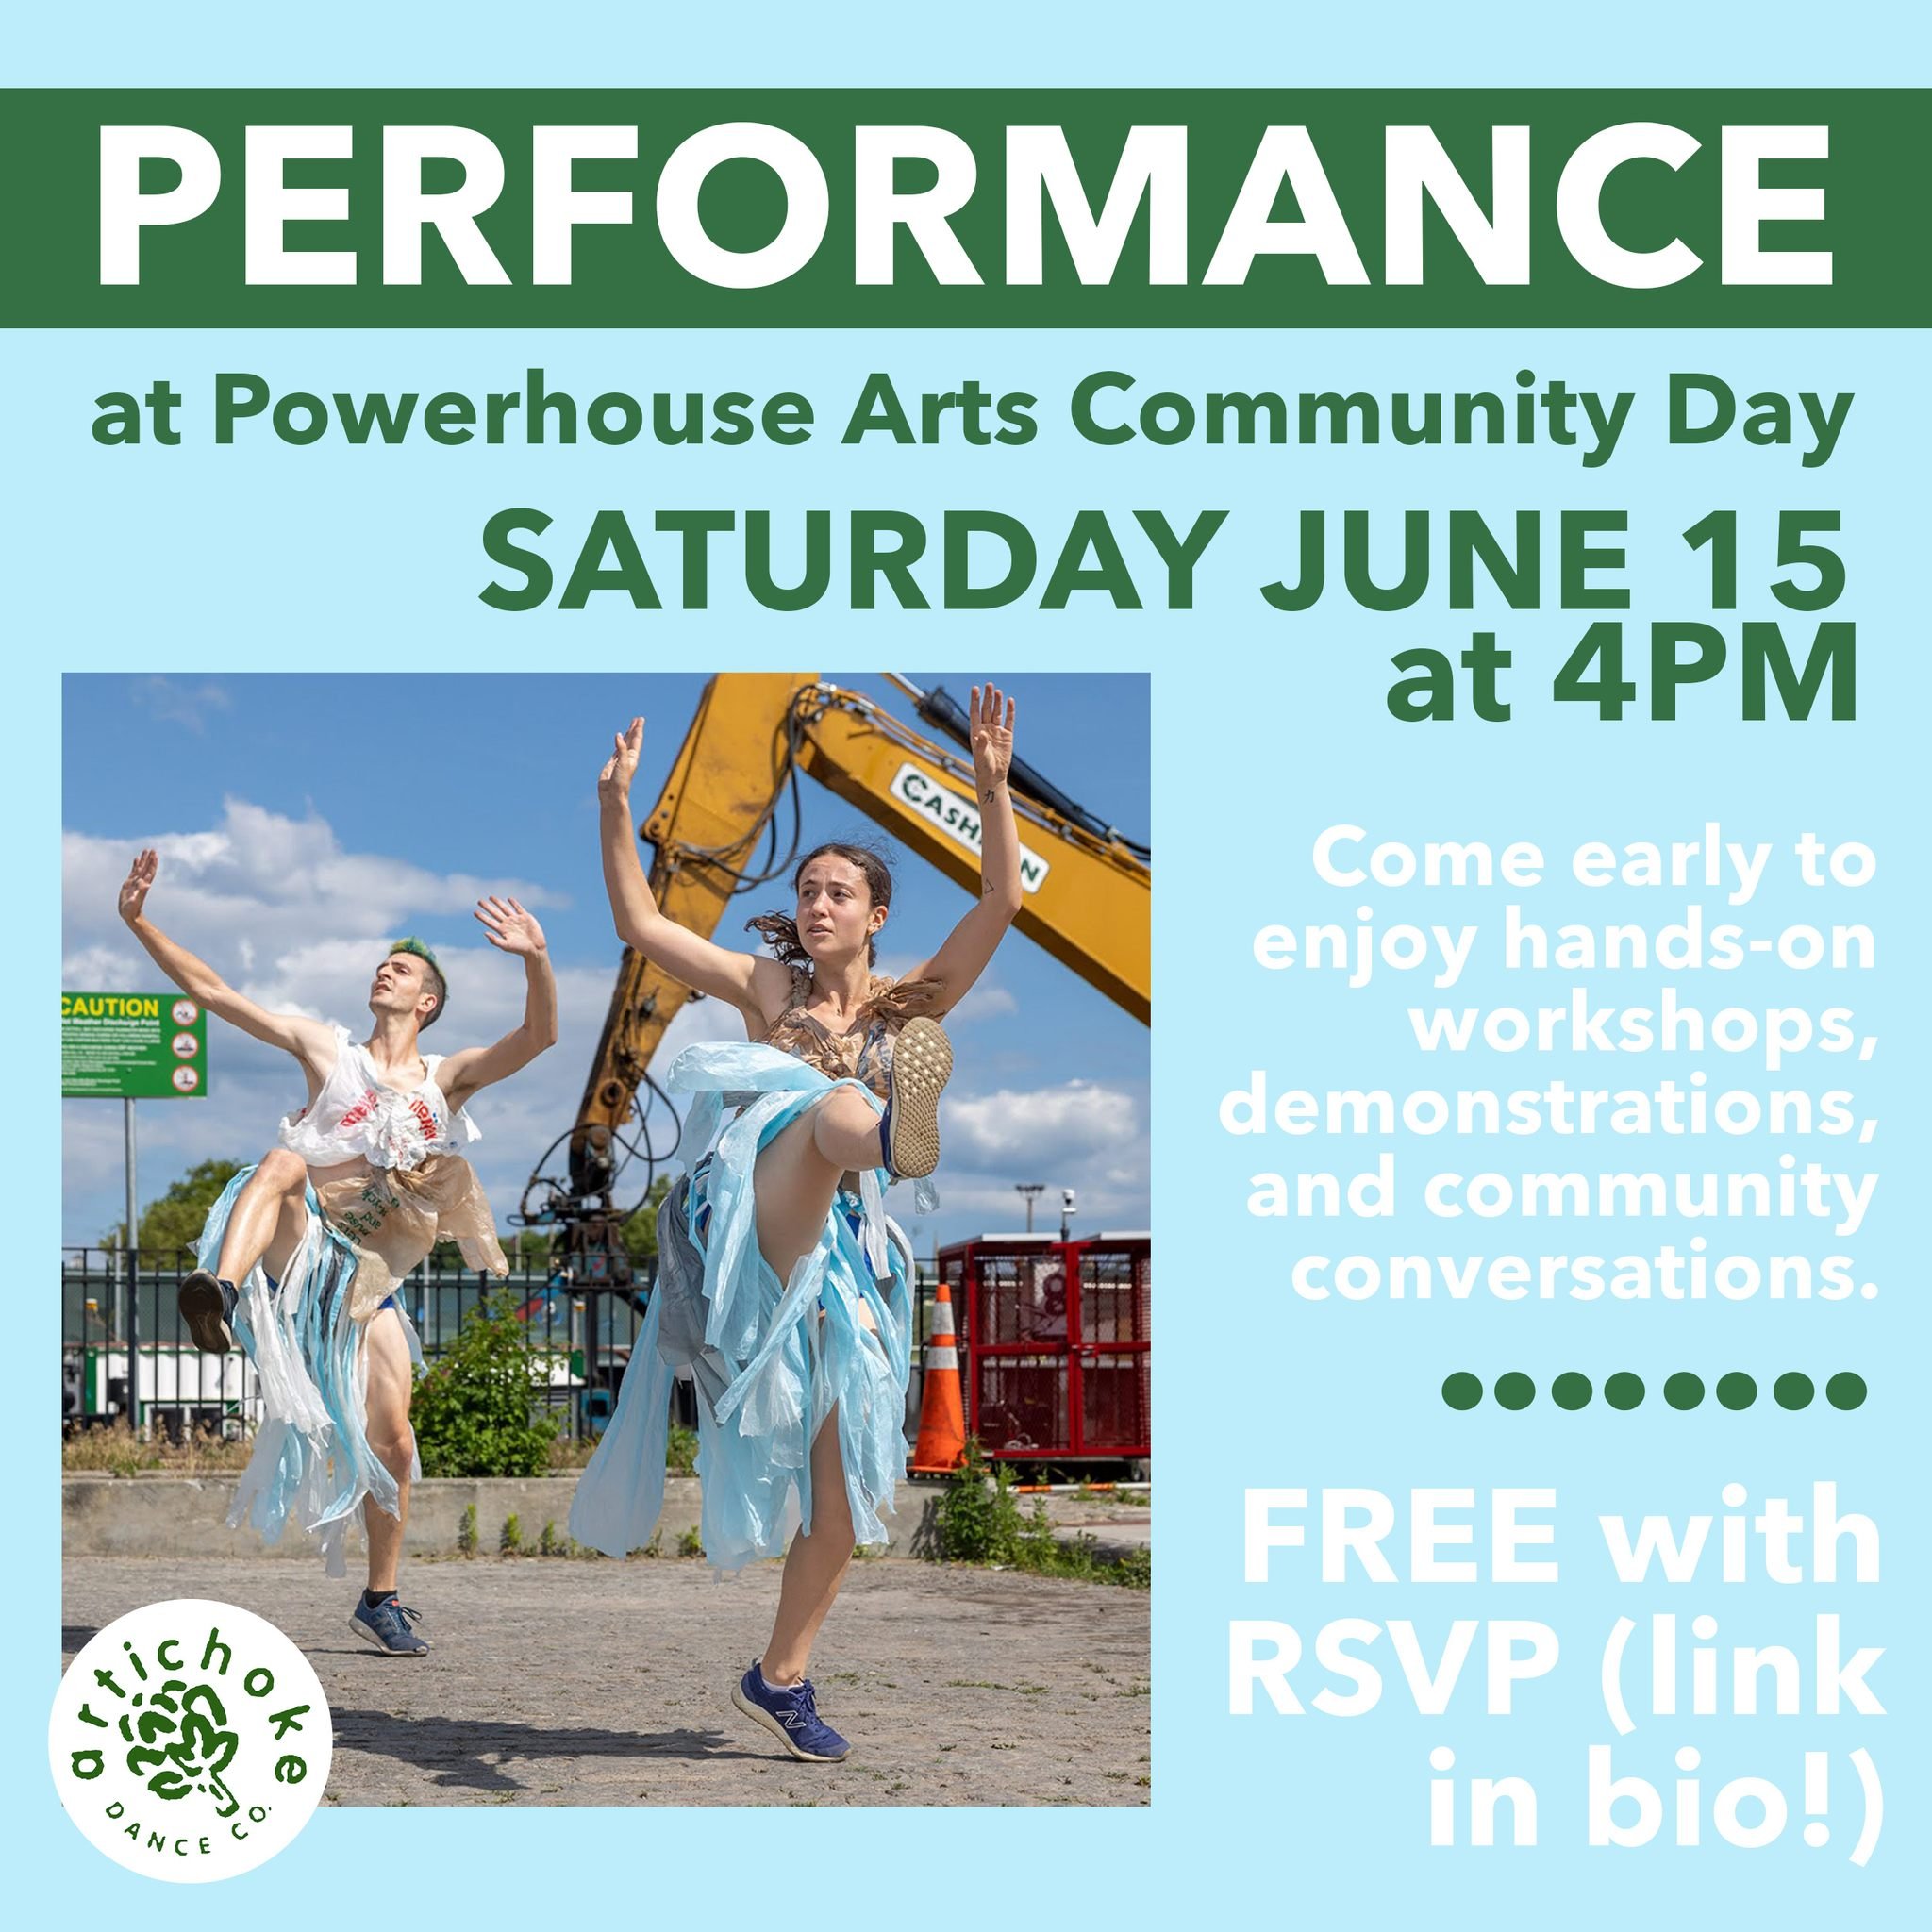 We are so excited to be performing as part of Powerhouse Arts' Community Day on Saturday, June 15! 🤩

The day at Powerhouse Arts will feature a variety of free events including hands-on workshops, community conversations, demonstrations, and MORE 🌟